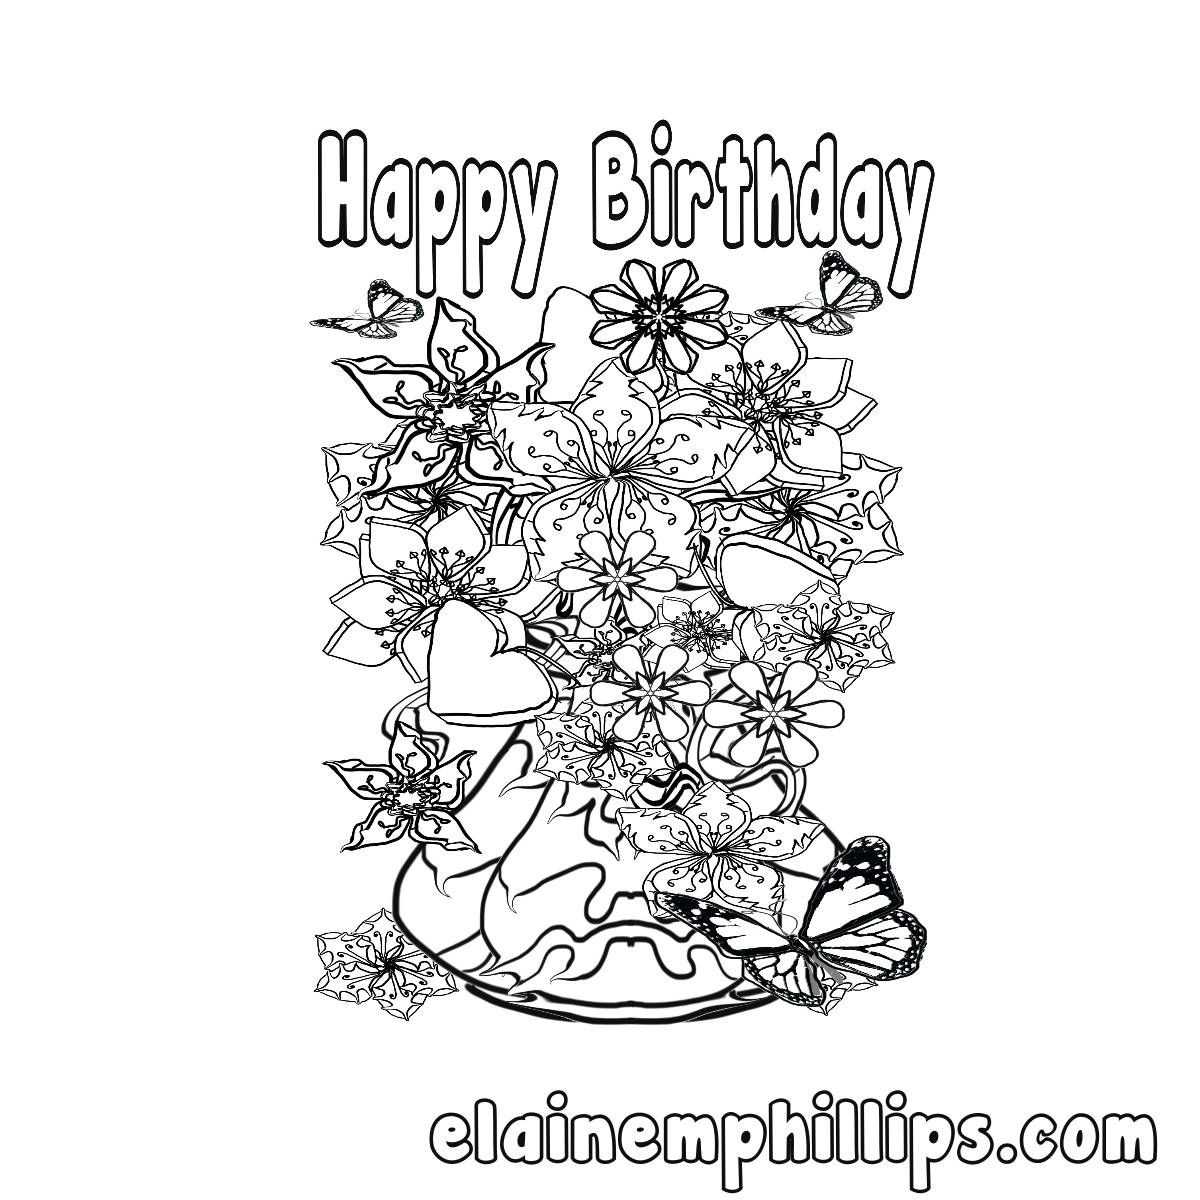 Coloring : Phenomenal Printableg Birthday Card Free For Intended For Mom Birthday Card Template